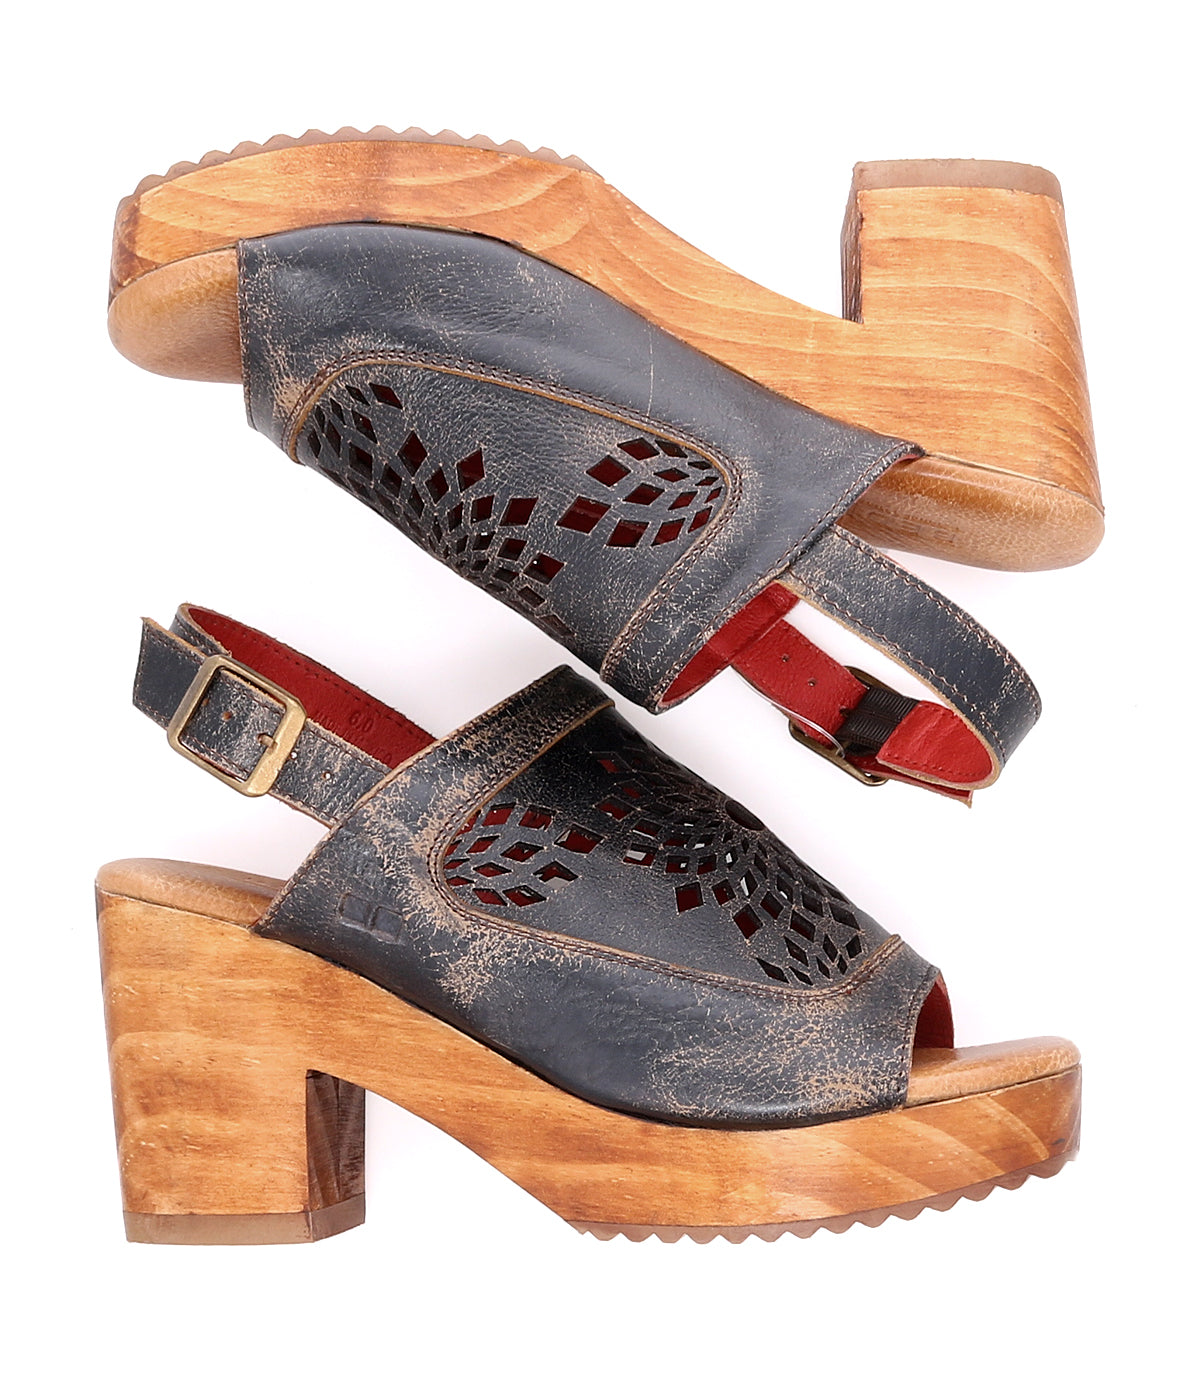 A pair of Bed Stu Jinkie women's sandals with adjustable ankle buckle and wooden heels.